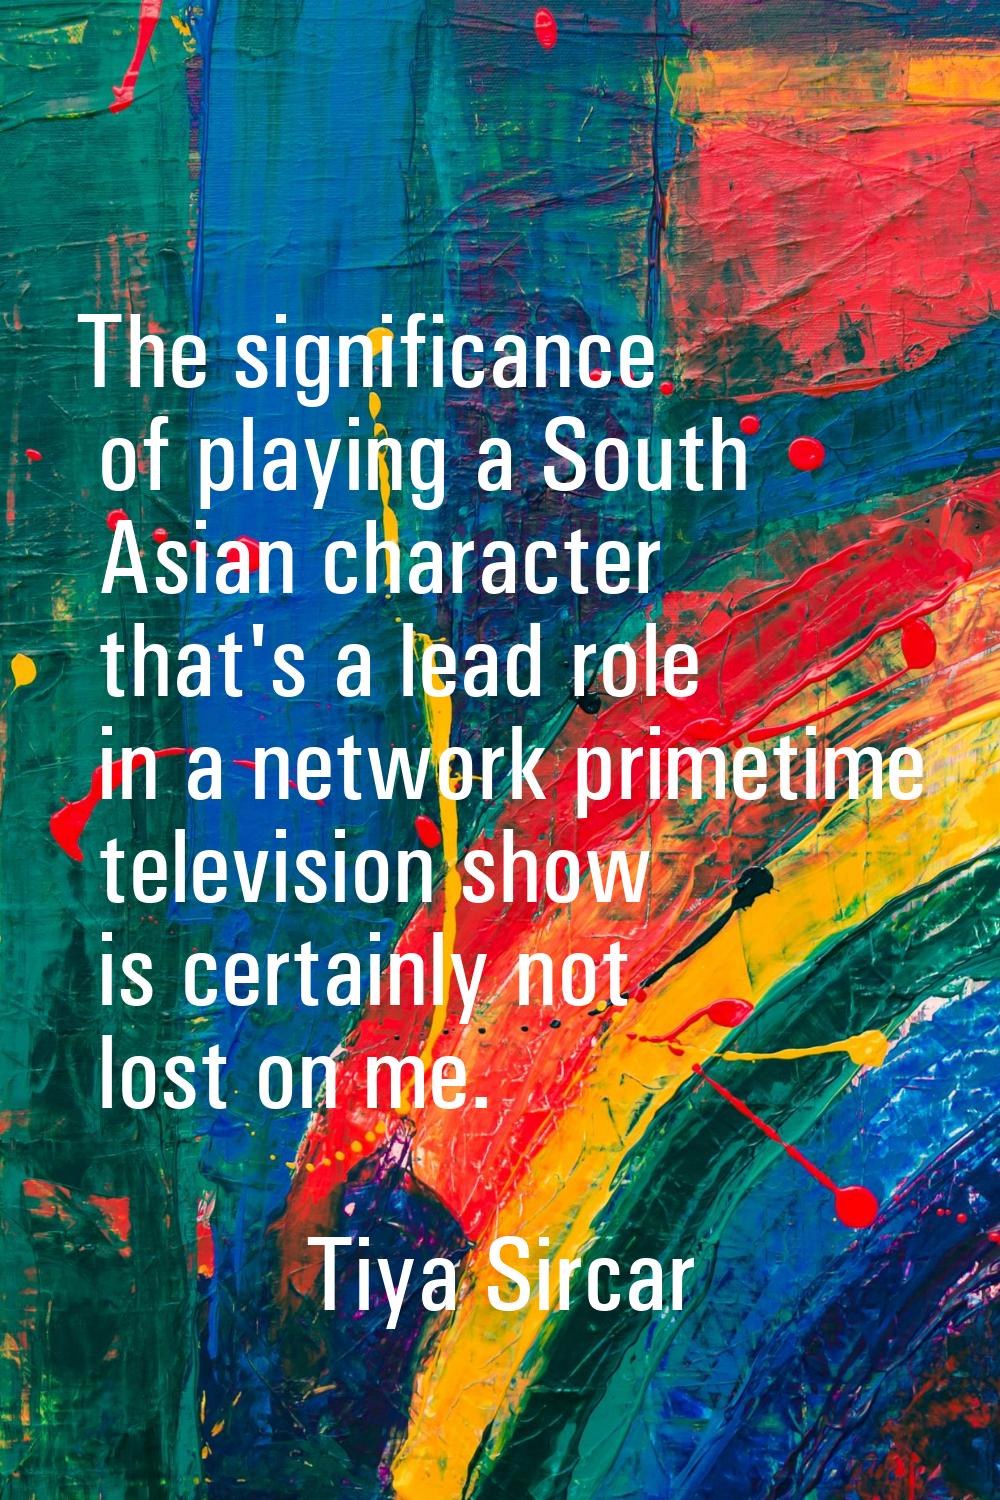 The significance of playing a South Asian character that's a lead role in a network primetime telev